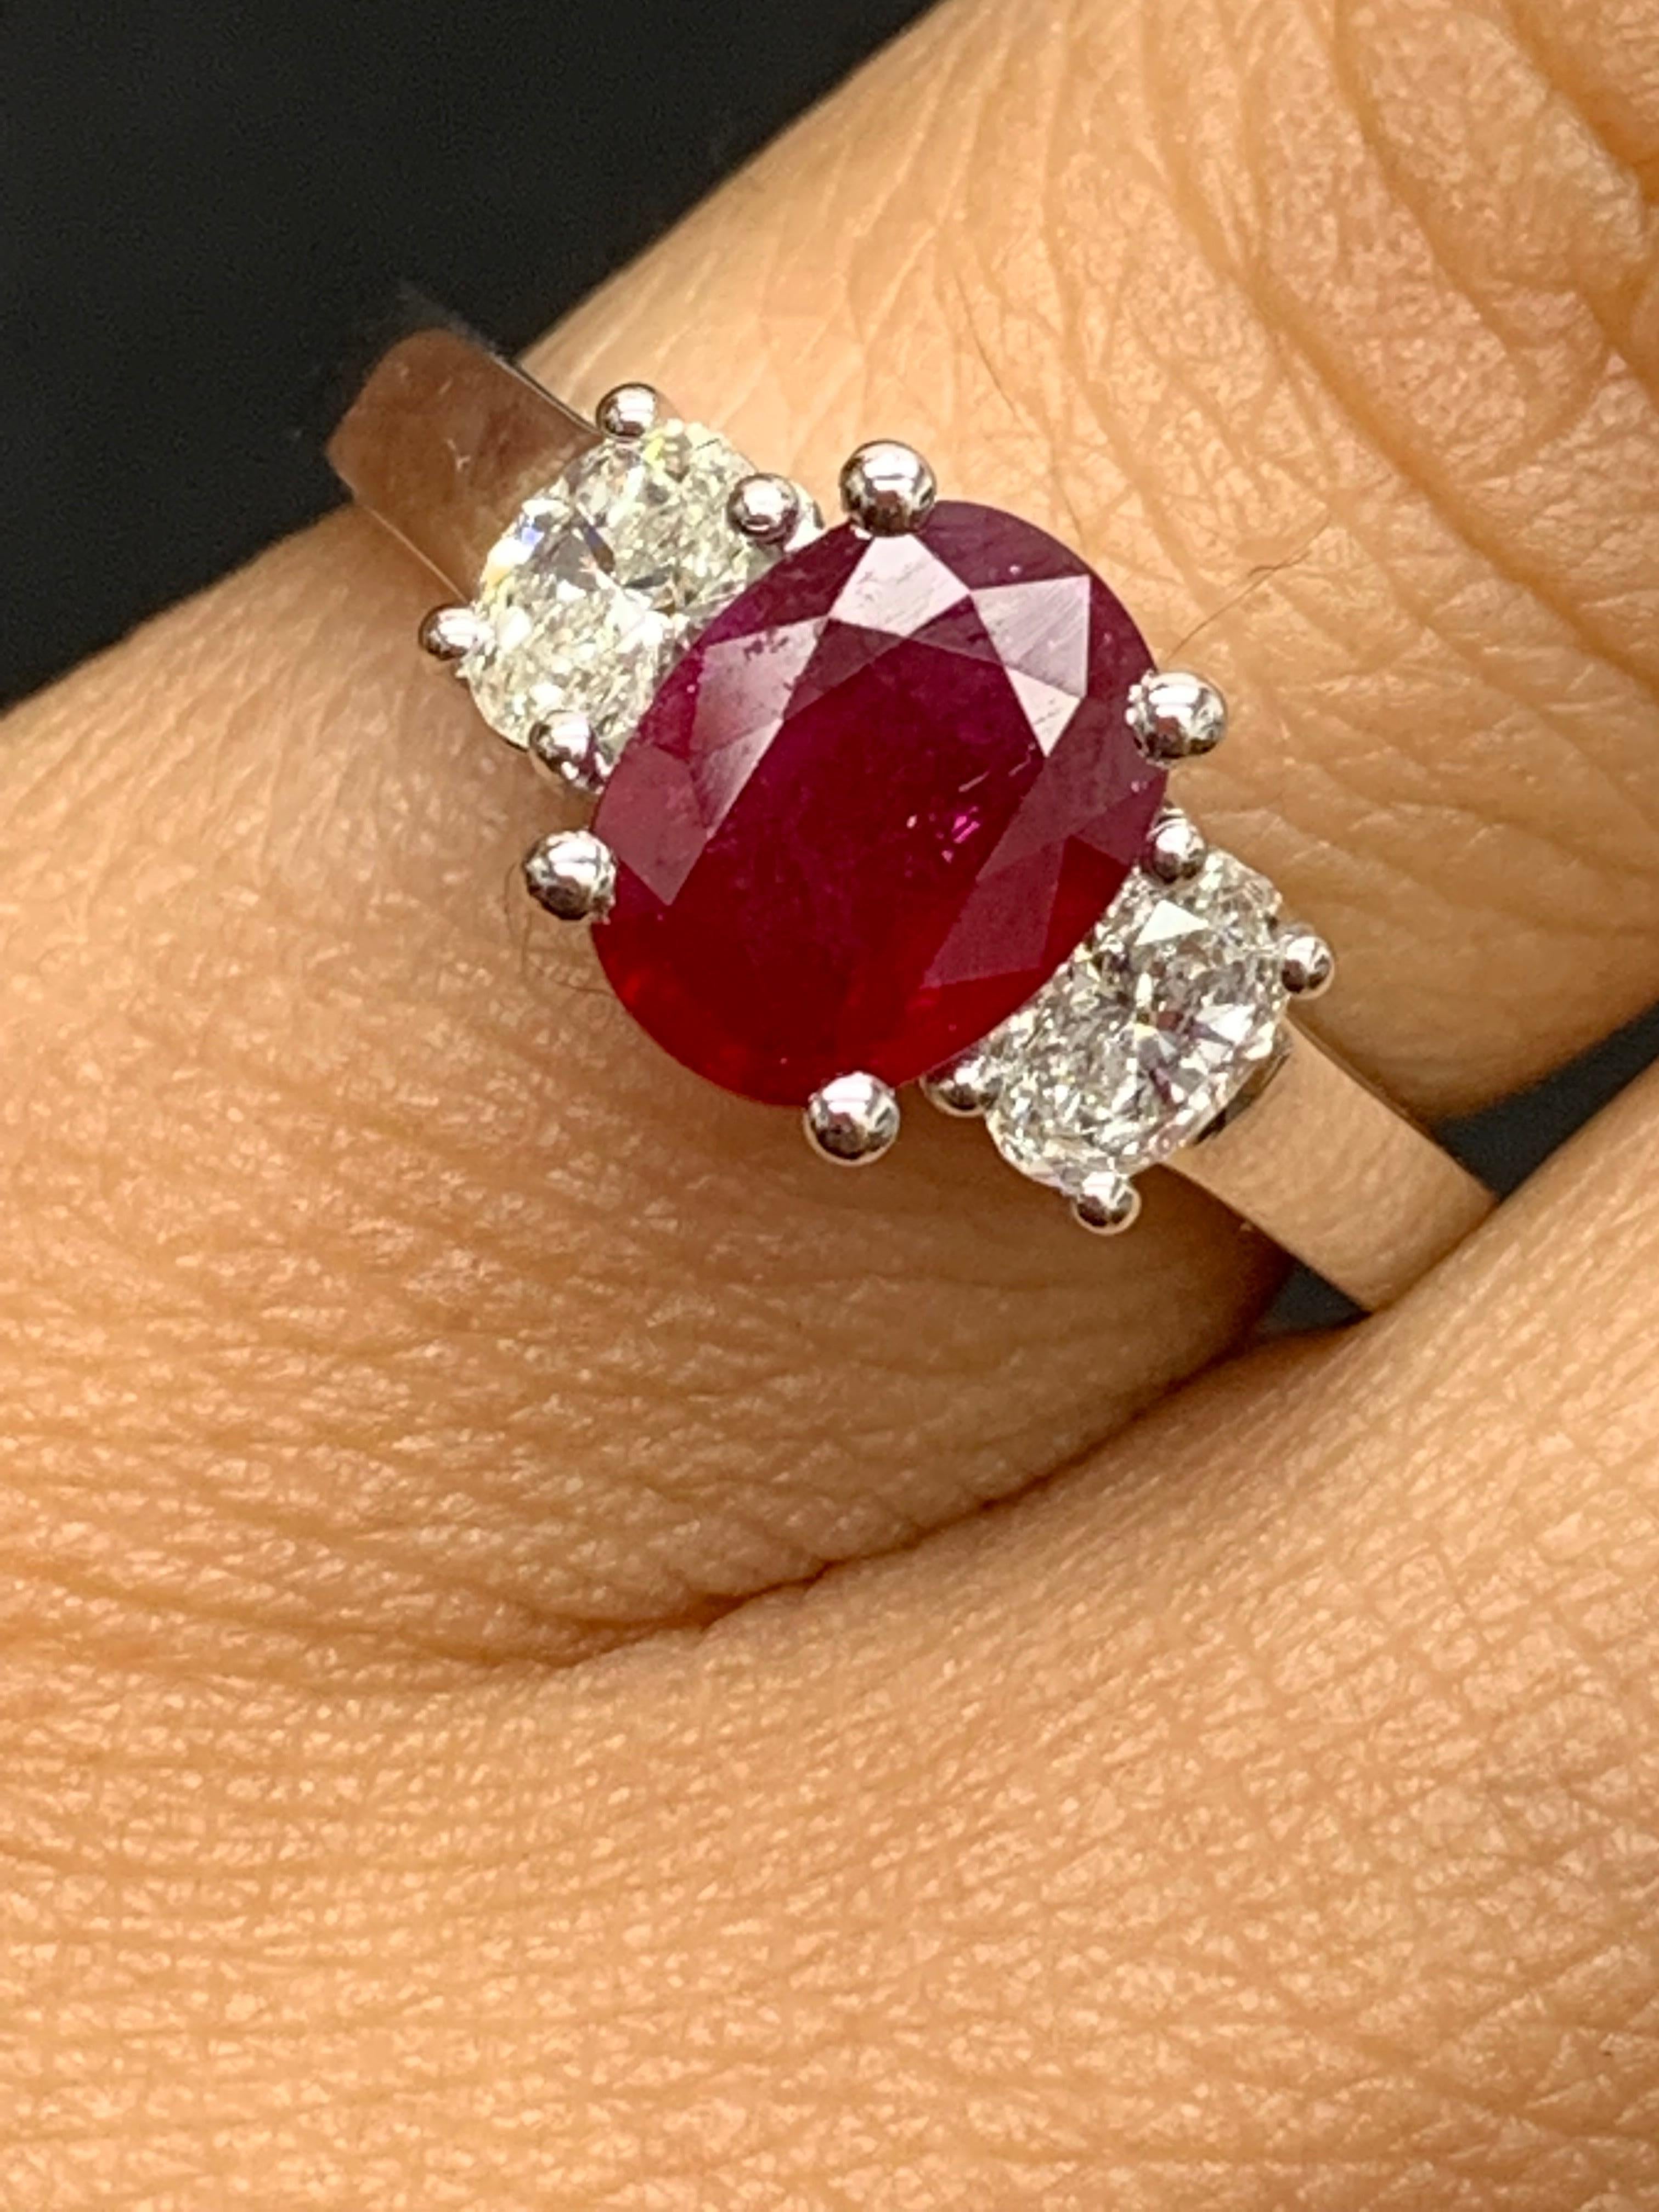 Showcases an Oval cut, Vibrant color lush red Ruby weighing 1.15 carats, flanked by two brilliant oval cut diamonds weighing 0.48 carats. Elegantly set in 18k White Gold.